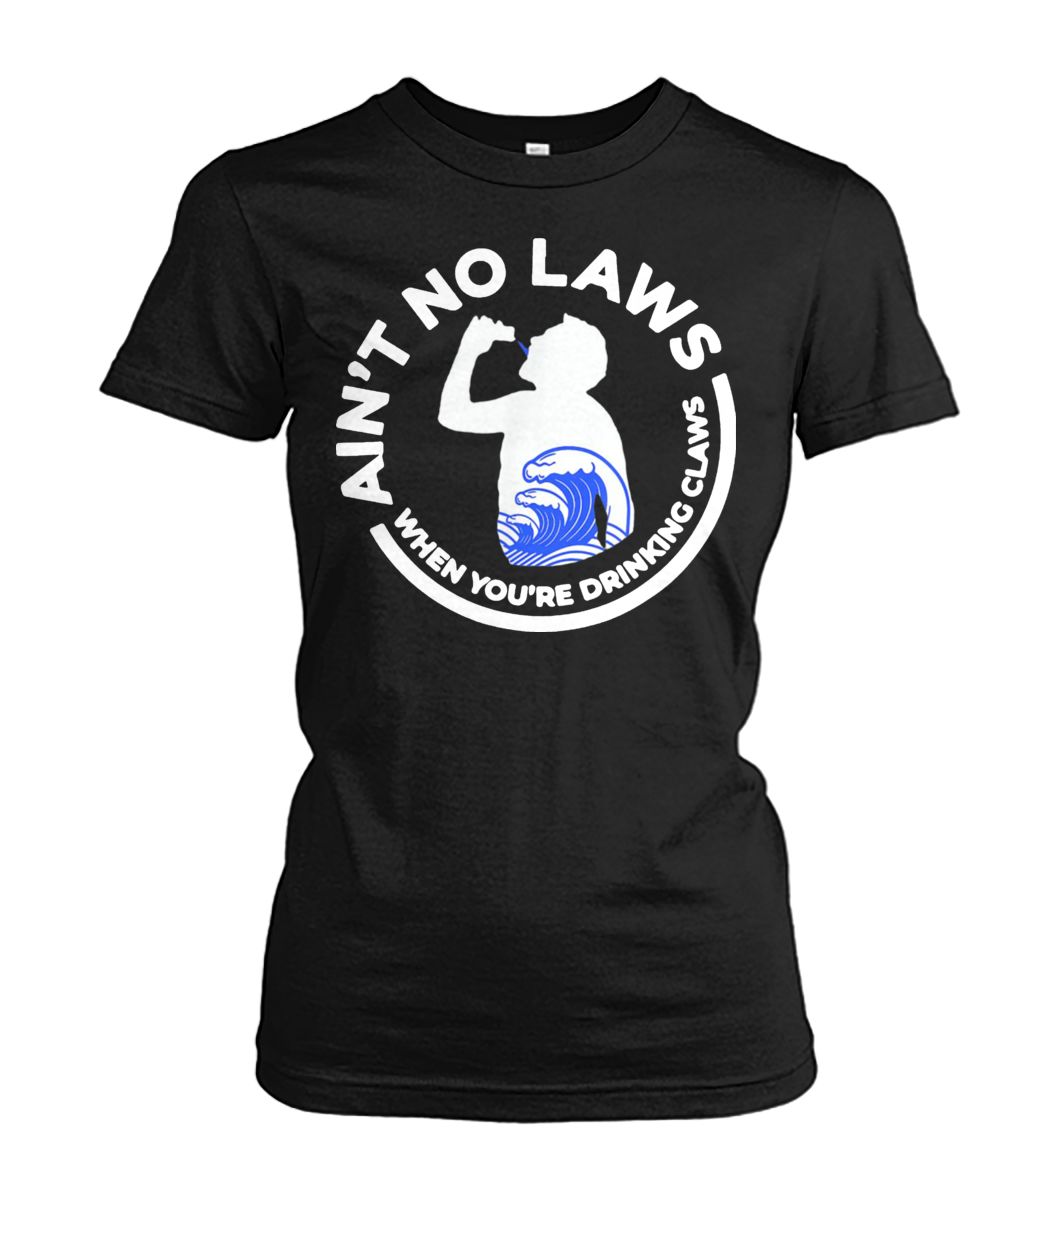 Trump ain't no laws when you are drinking claws women's crew tee